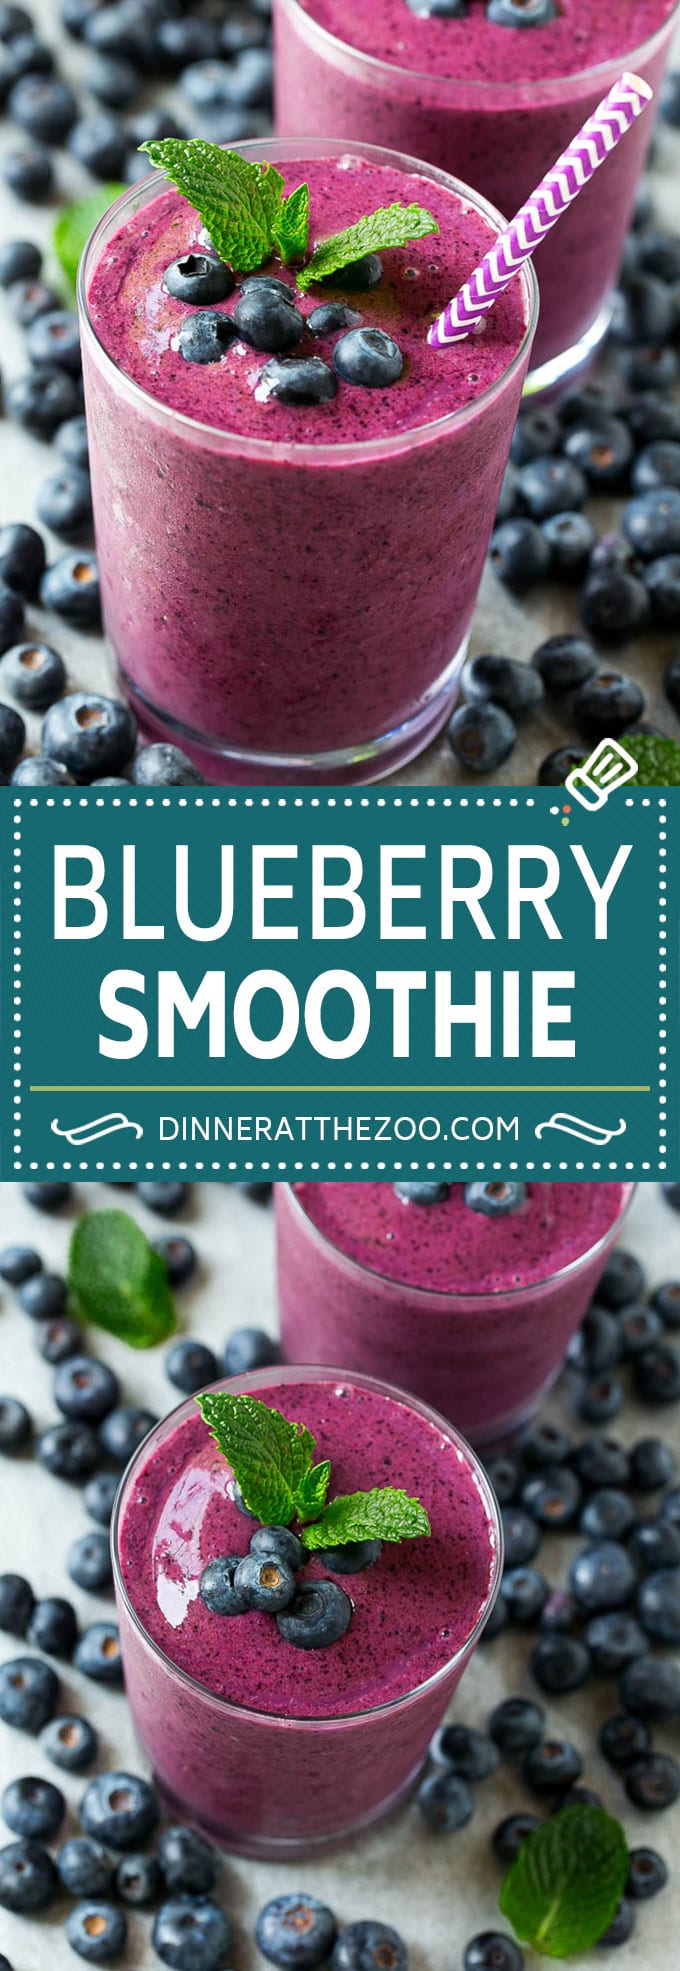 Blueberry Smoothie Recipe | Healthy Blueberry Smoothie | Smoothie Recipe #blueberry #smoothie #drink #dinneratthezoo